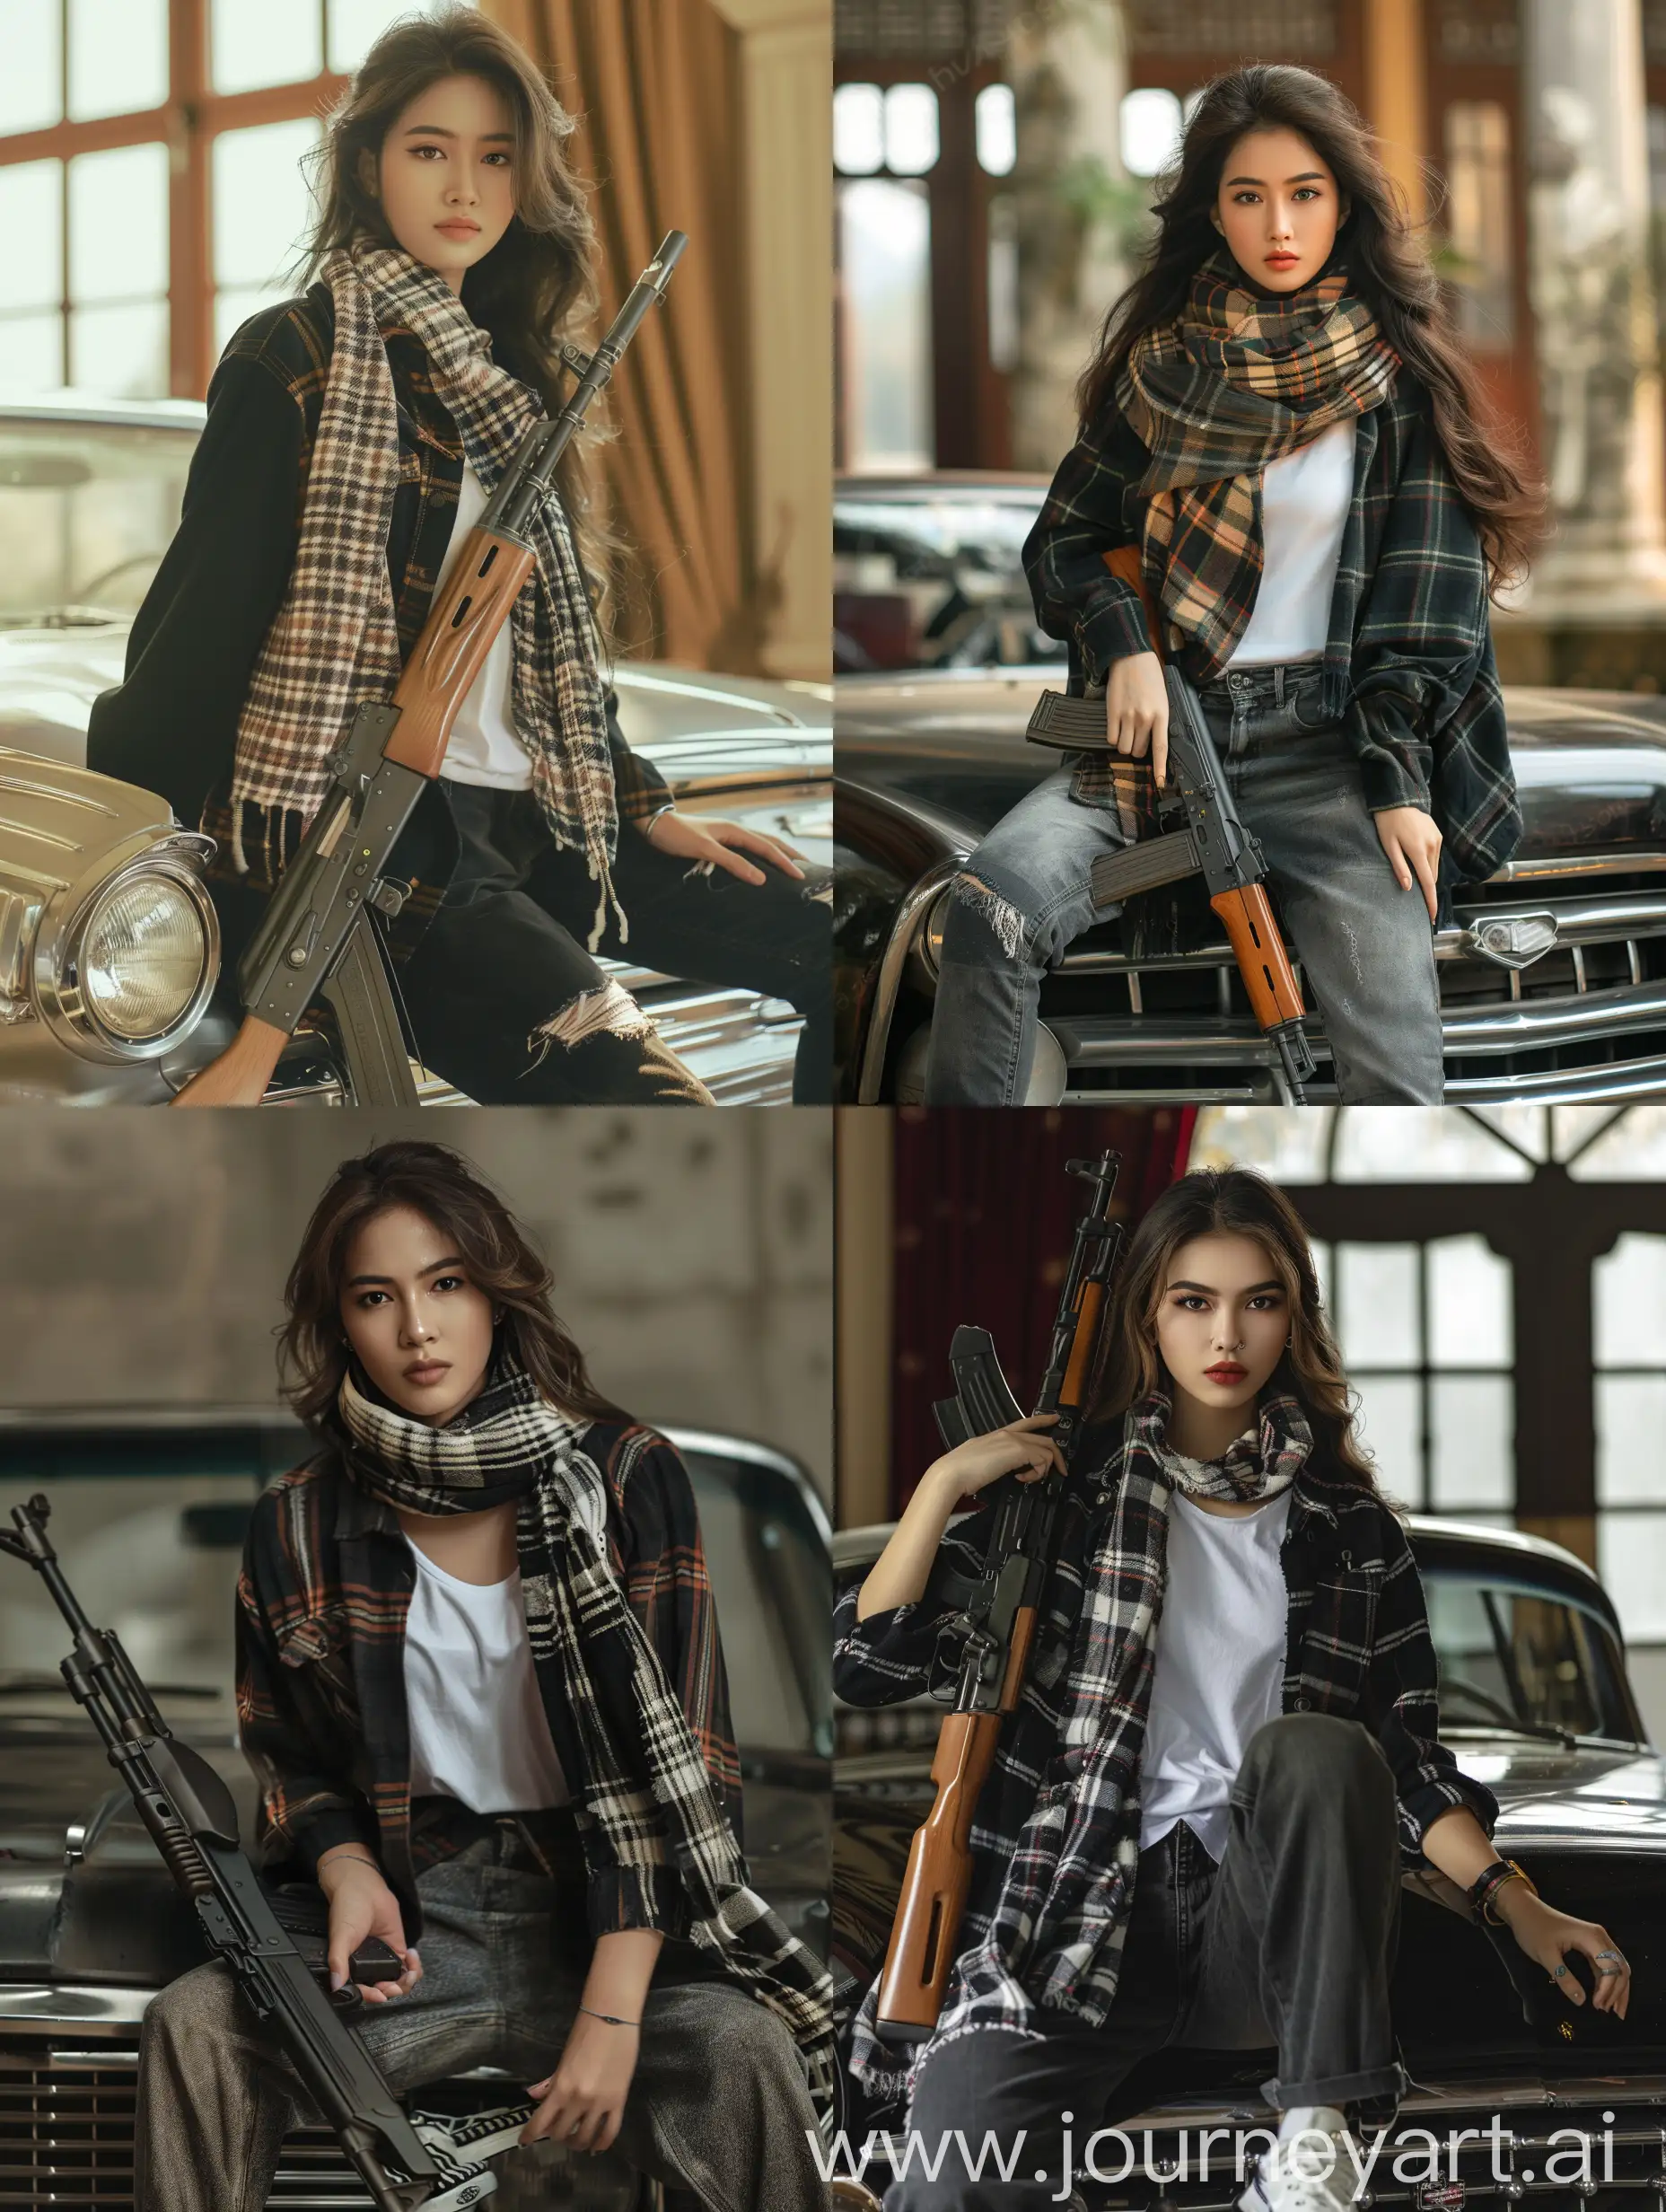 Young-Thai-Woman-Poses-with-AK47-on-Classic-Car